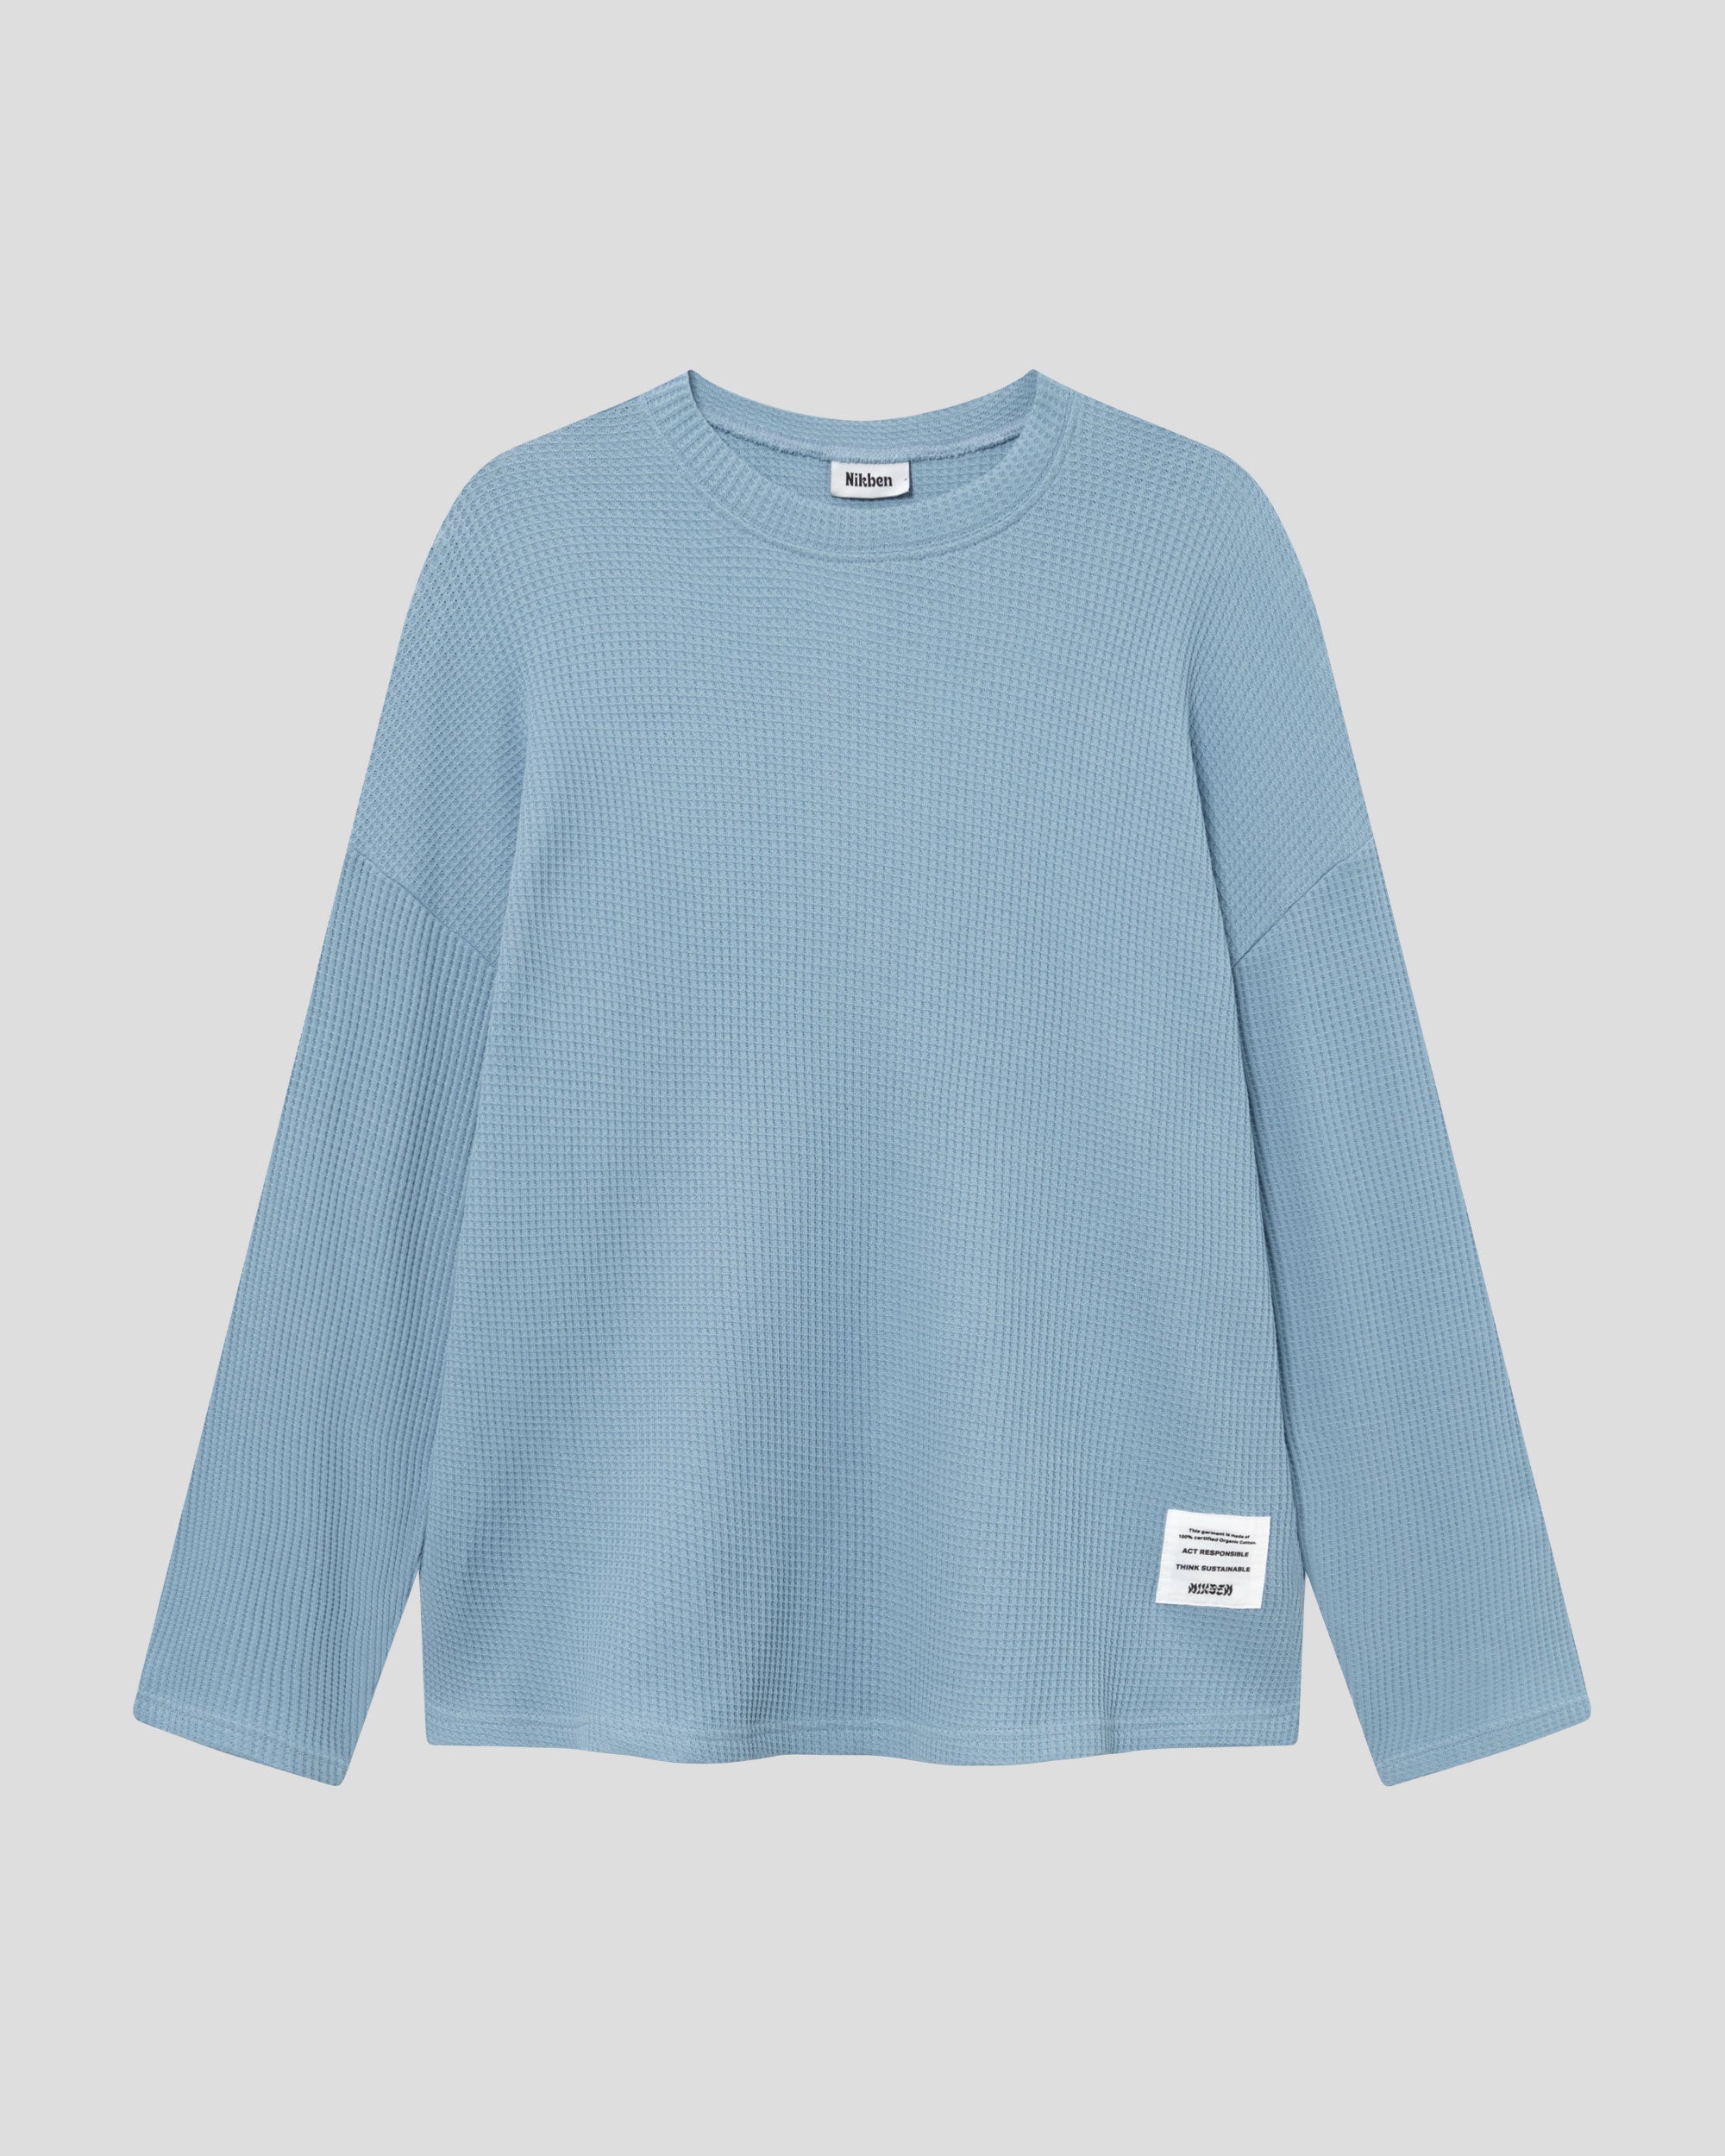 Sky blue waffle-patterned sweatshirt with a stitched-on material label.